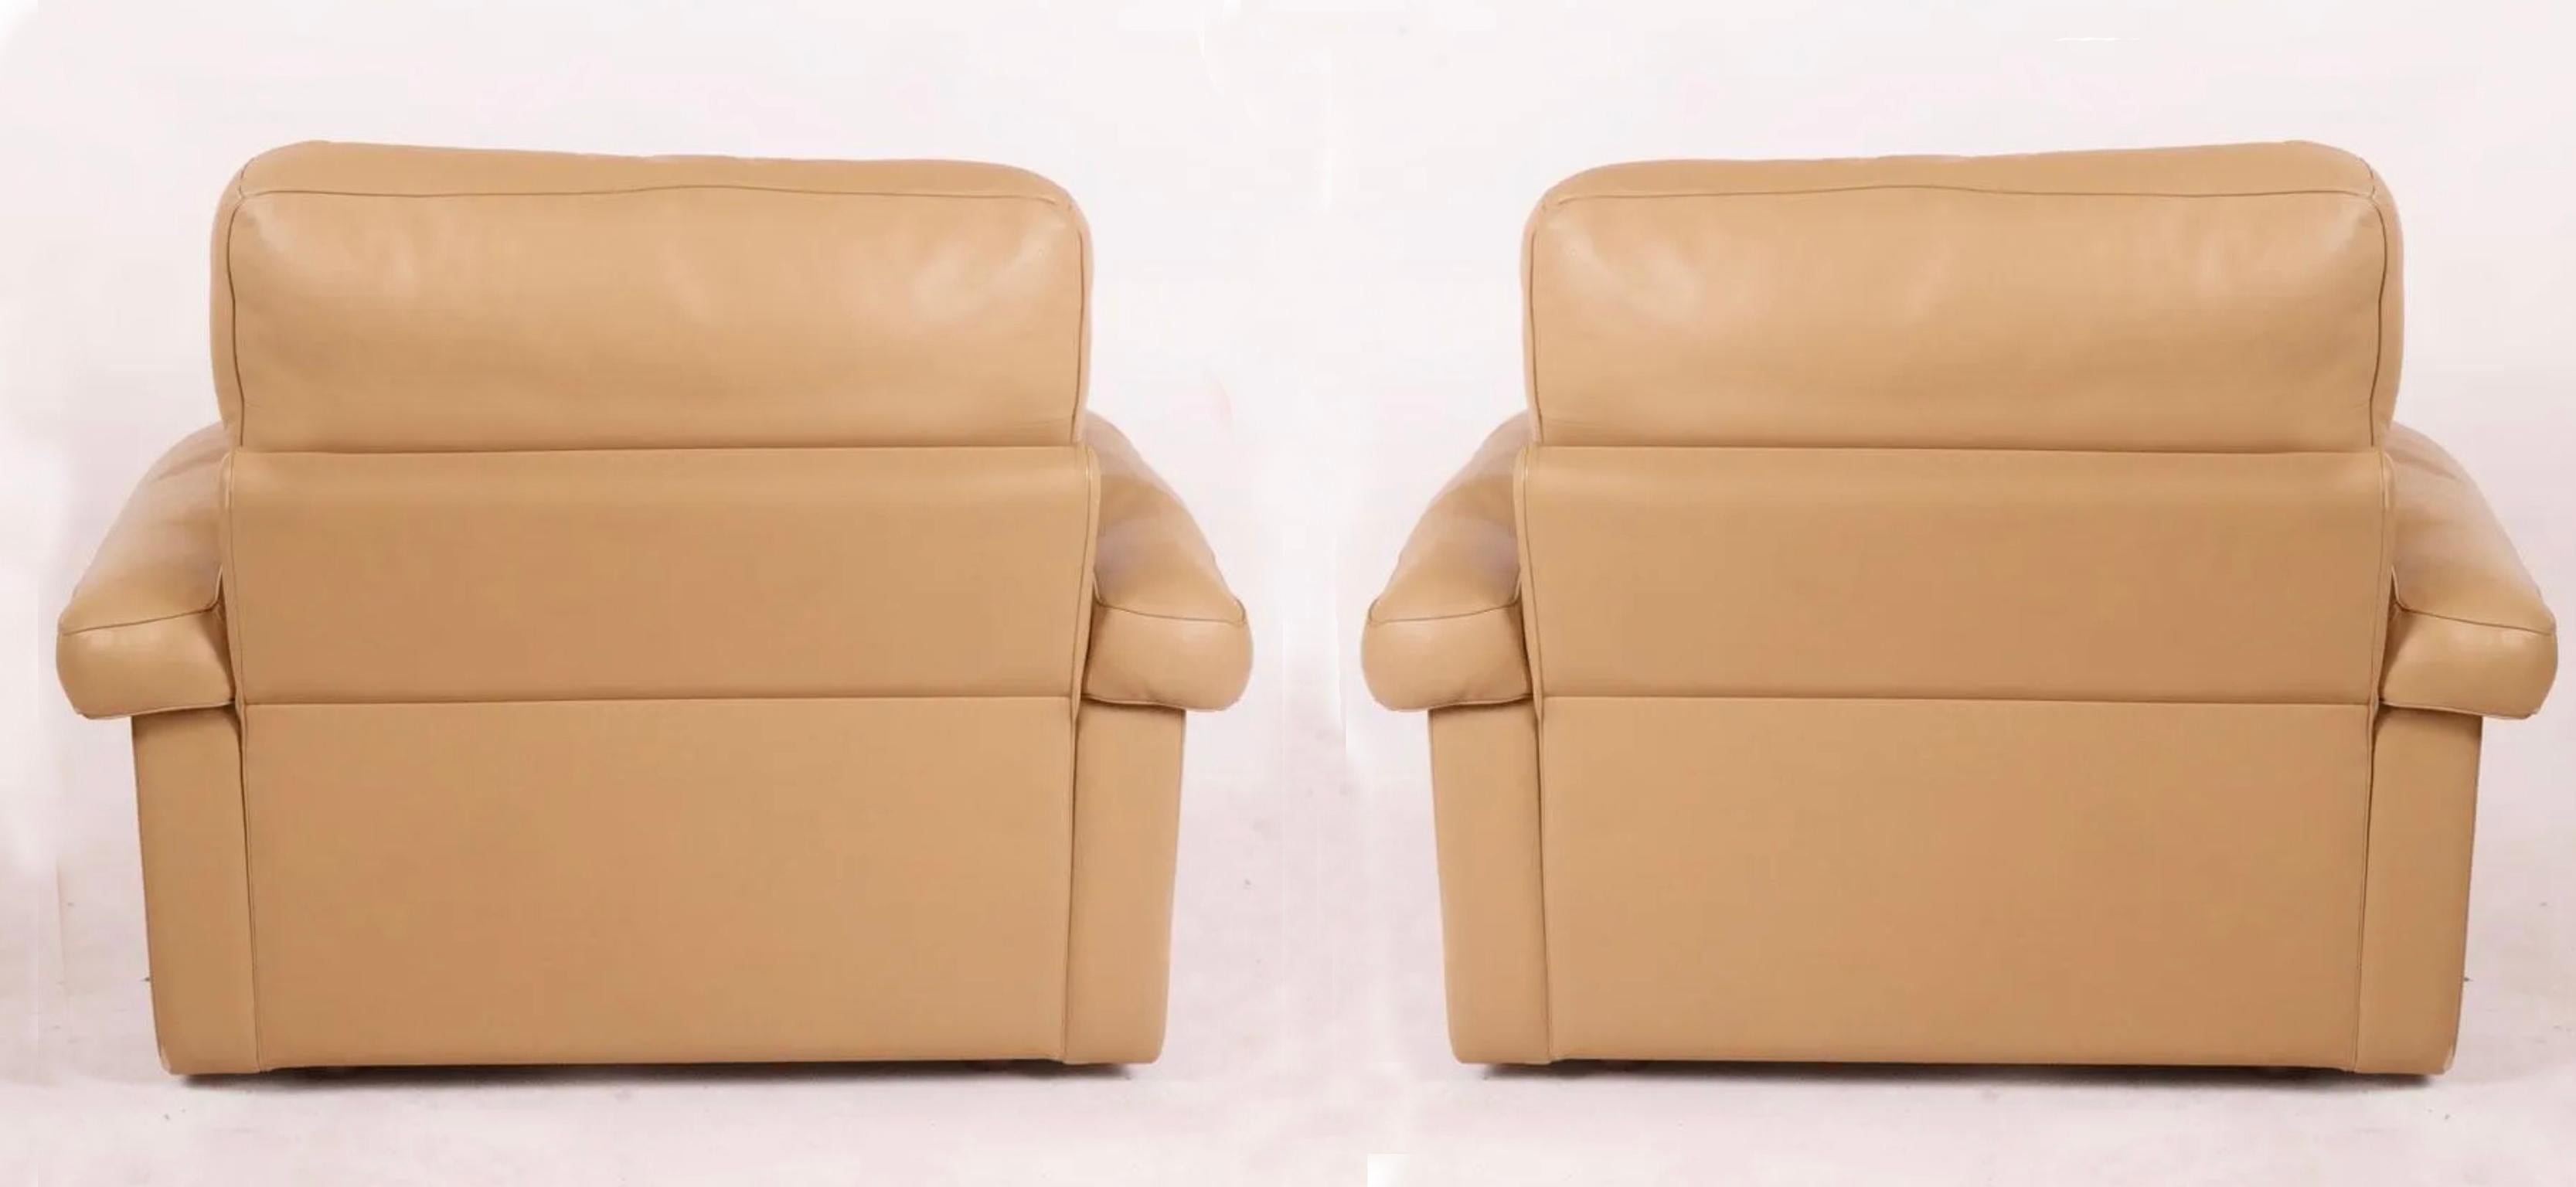 Pair of Midcentury Tan Leather Lounge Chairs by Tito Agnoli for Poltrona Frau In Good Condition For Sale In BROOKLYN, NY